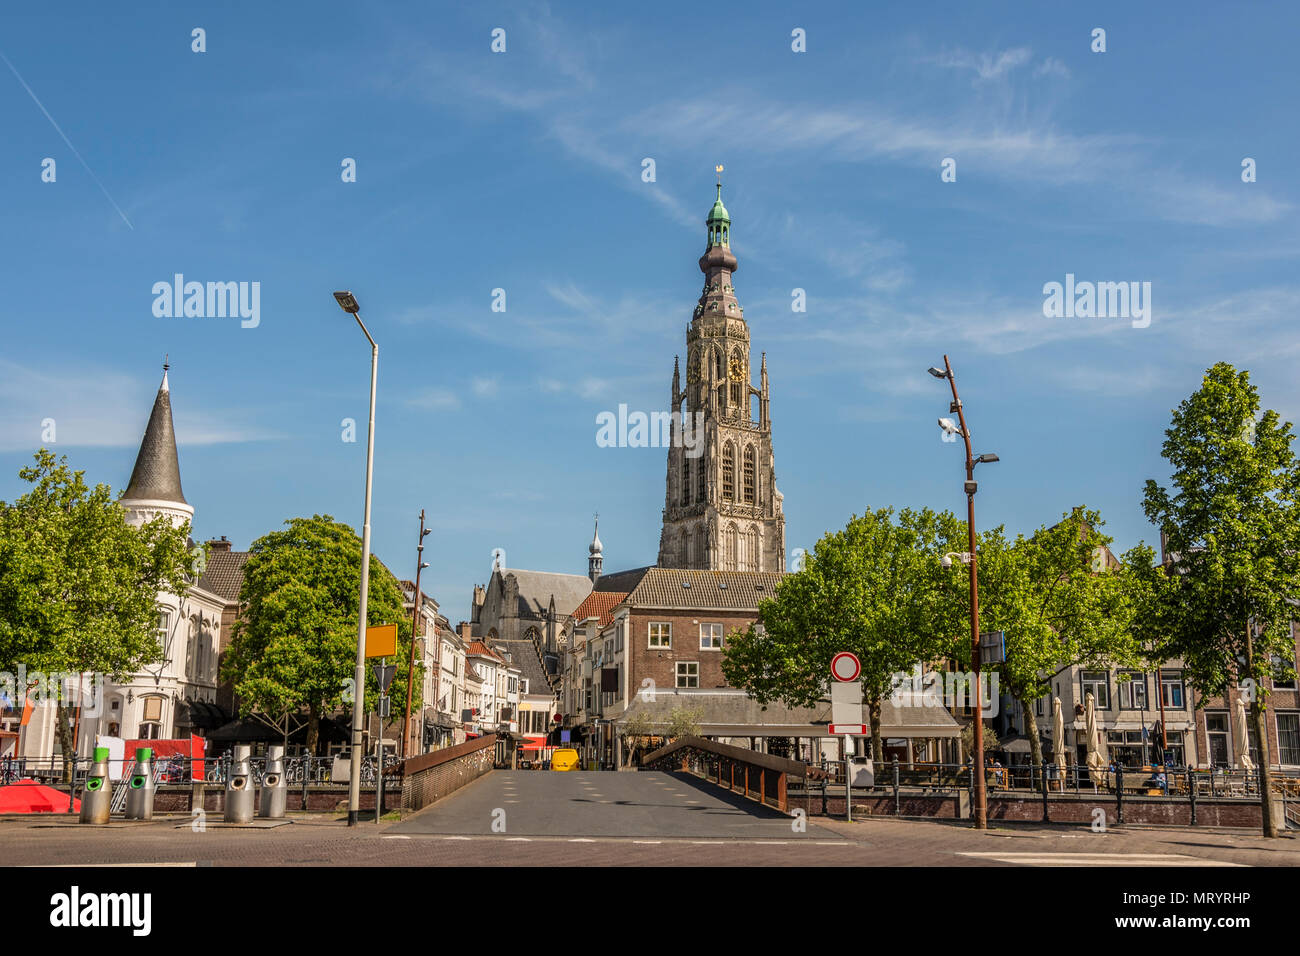 extract vorm Ontdooien, ontdooien, vorst ontdooien Bridge and main street entrance to the city of Breda. Stresses the tower of  the great church of Breda. Netherlands Stock Photo - Alamy